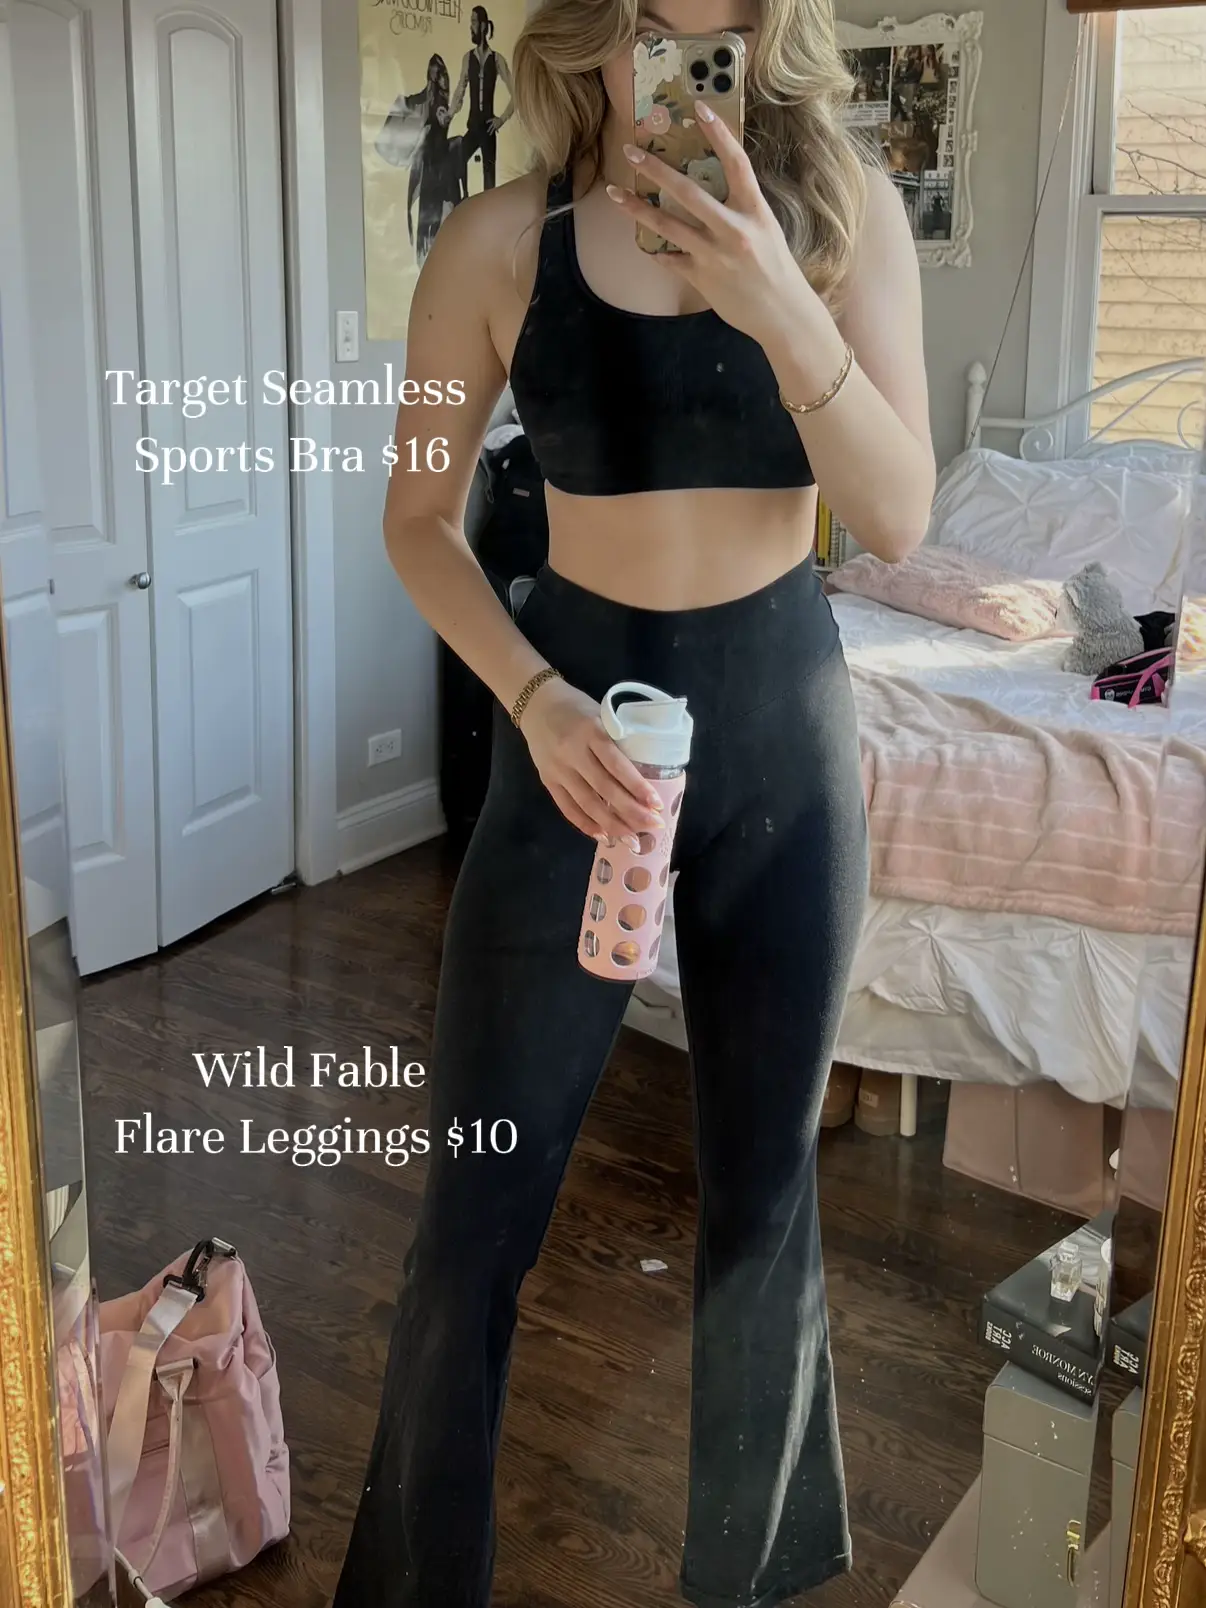 pink-themed activewear ideas!🌸  Gallery posted by michelle.belle